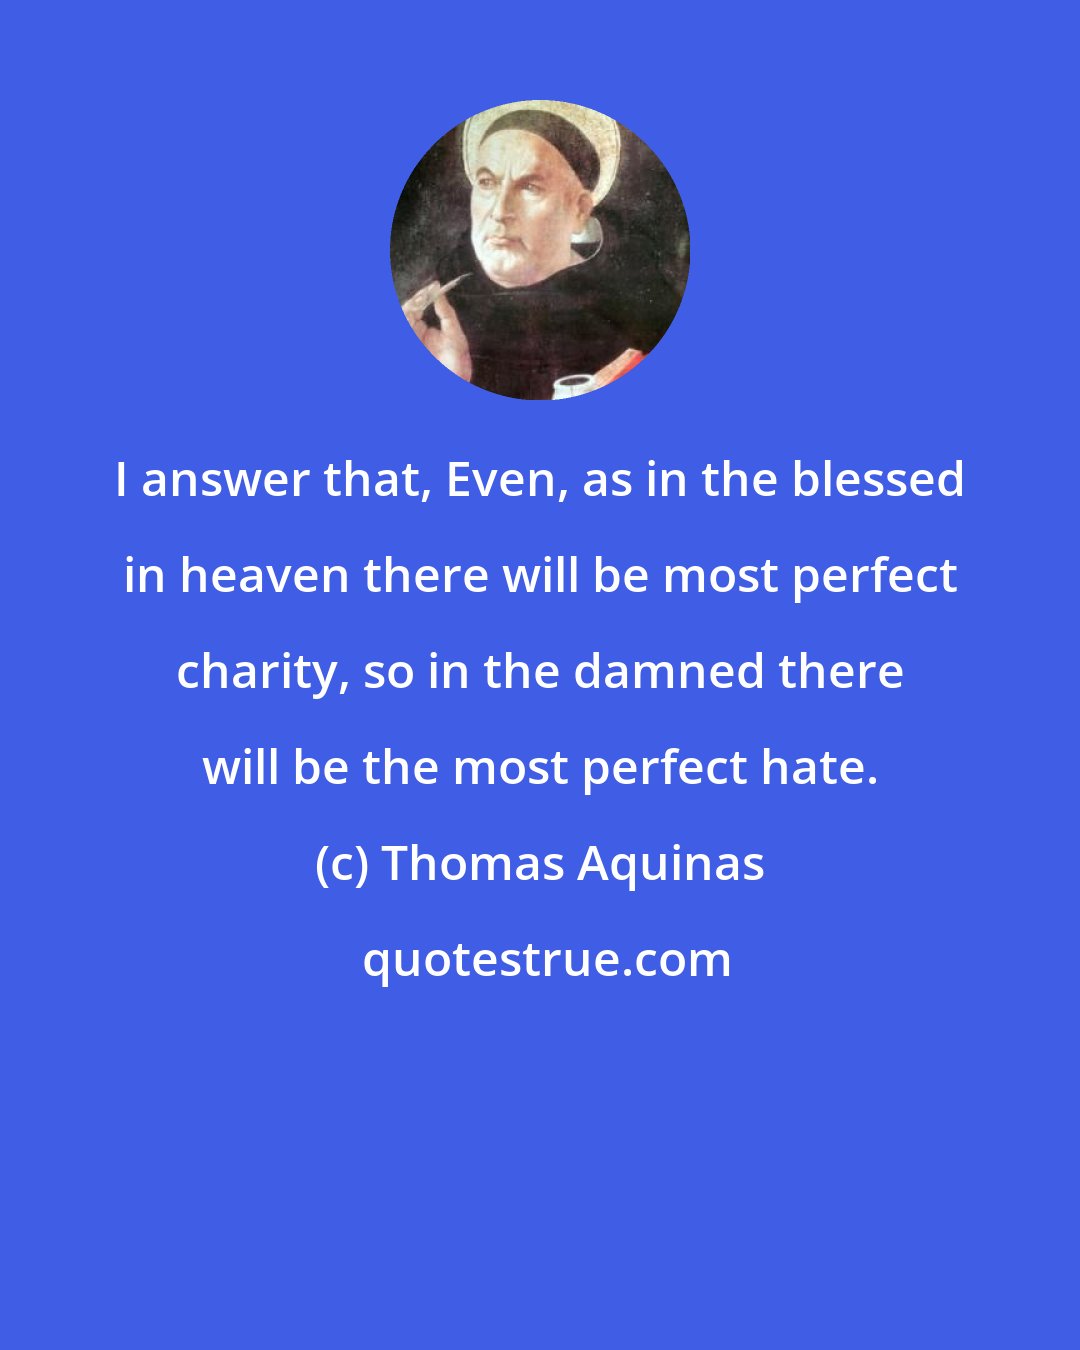 Thomas Aquinas: I answer that, Even, as in the blessed in heaven there will be most perfect charity, so in the damned there will be the most perfect hate.